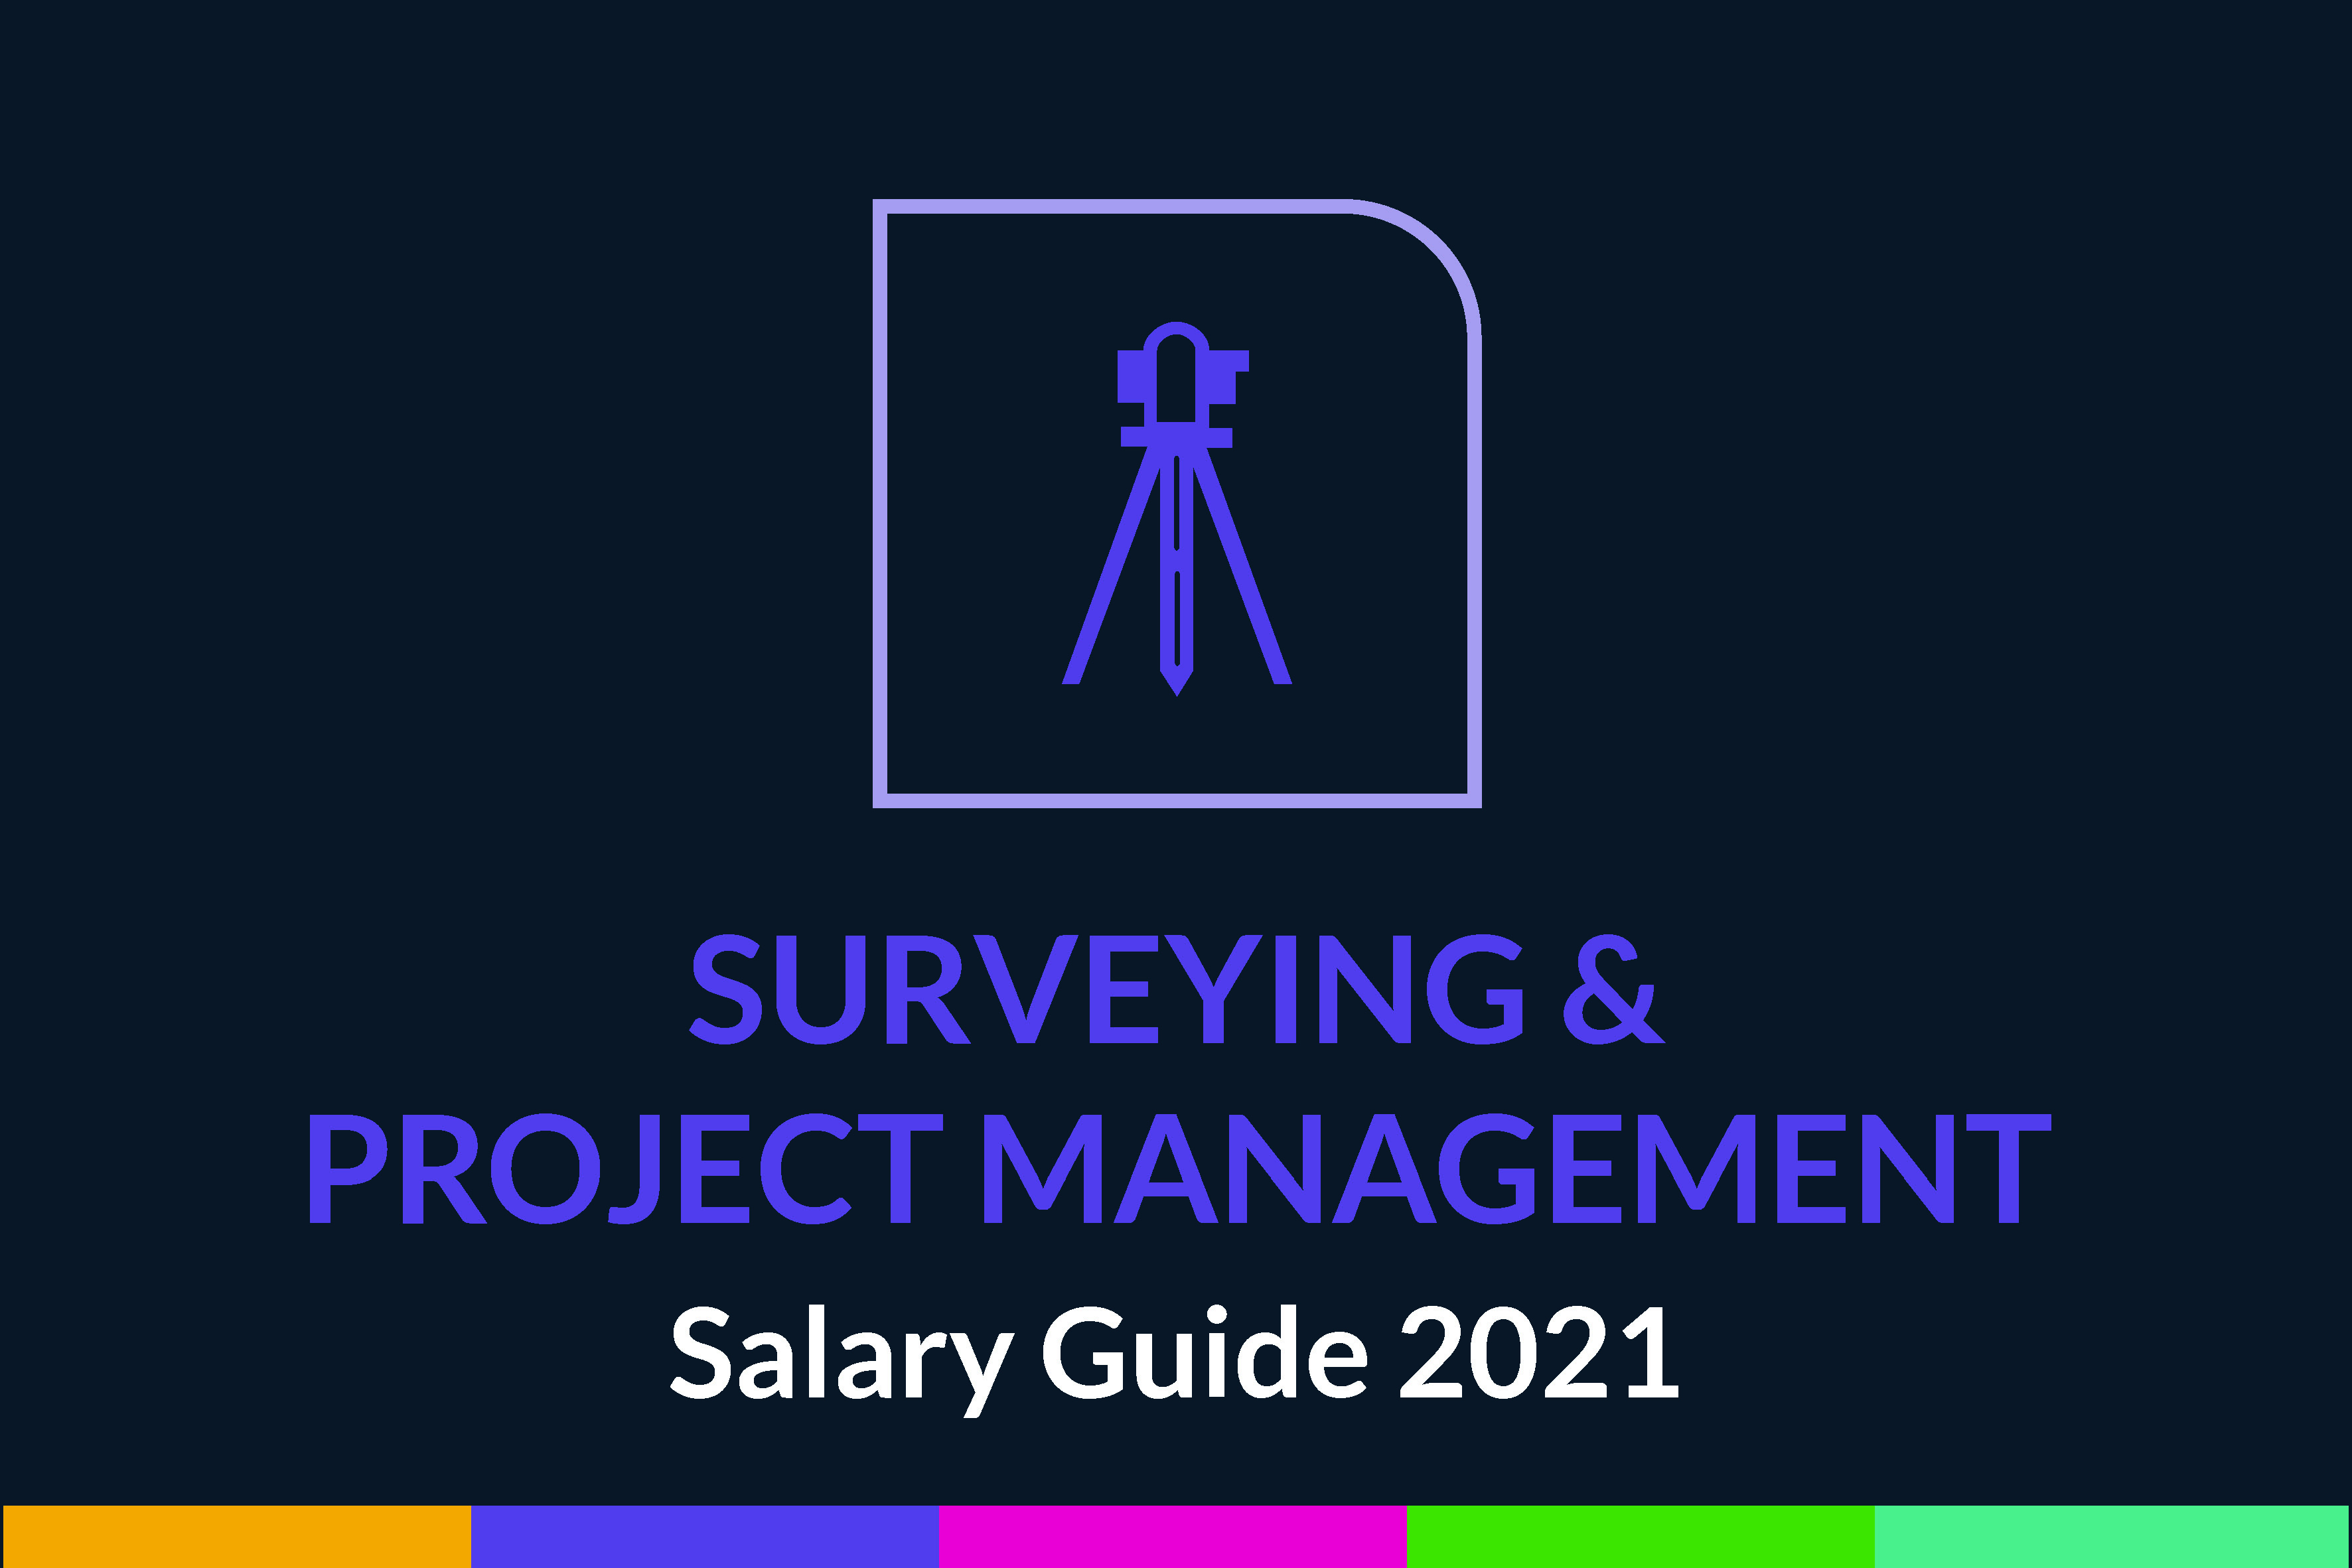 Surveying & Project Management Salary Guide